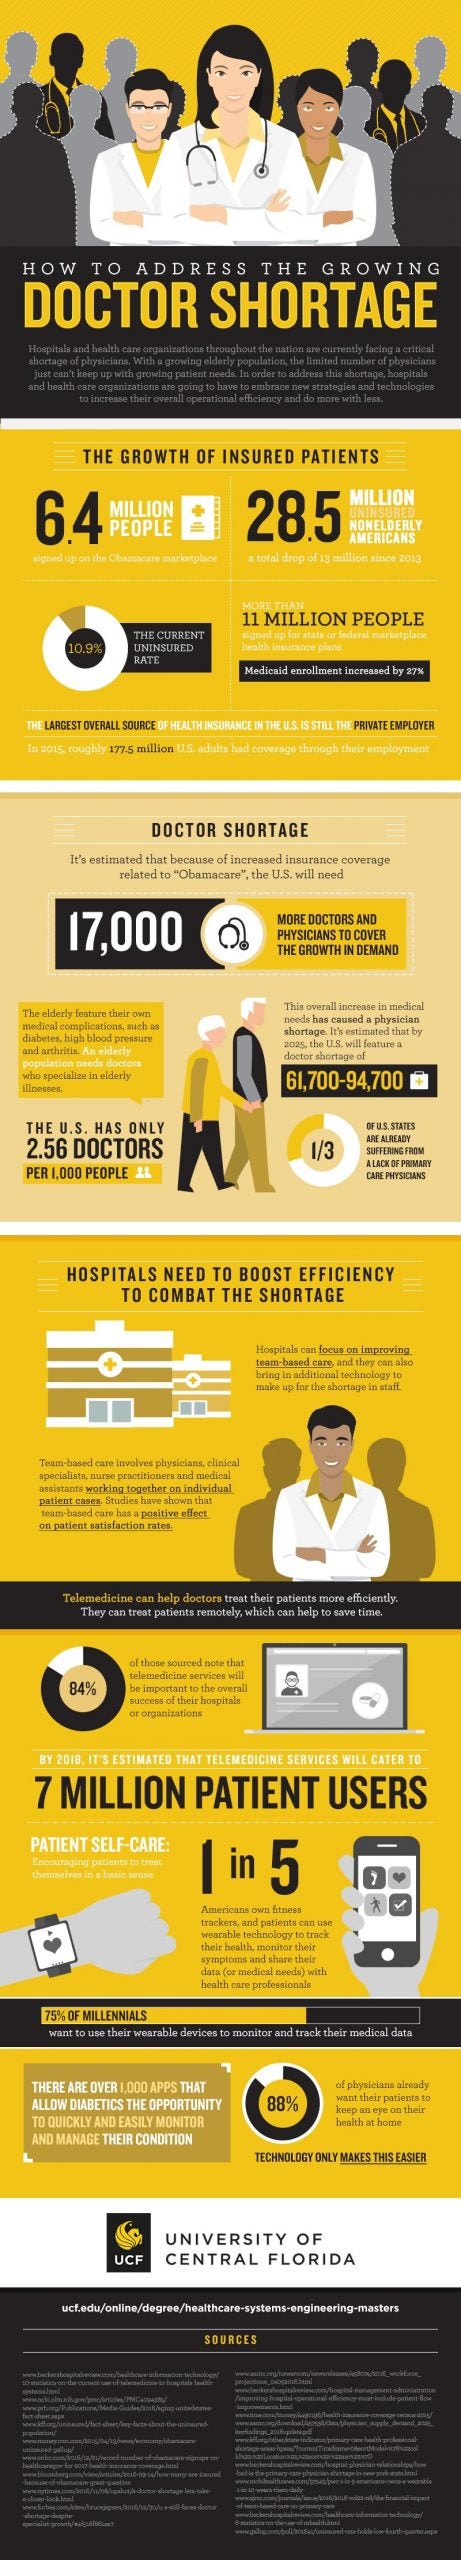 Infographic about addressing the growing doctor shortage. Description and in-image text below image.